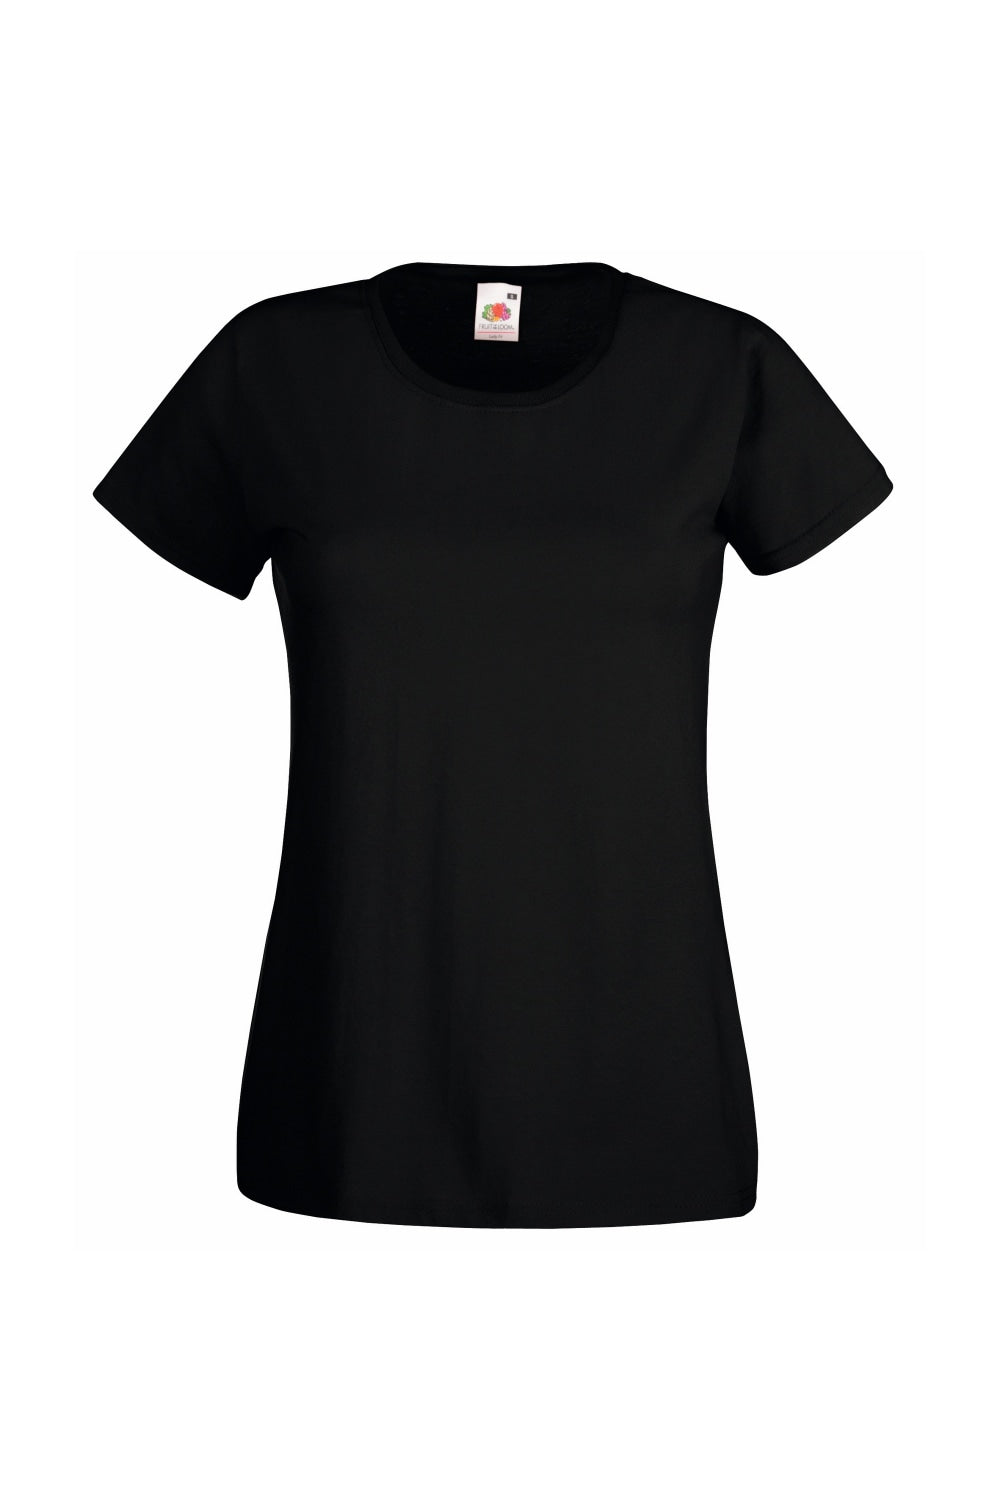 Fruit Of The Loom Ladies/Womens Lady-Fit Valueweight Short Sleeve T-Shirt (Black)